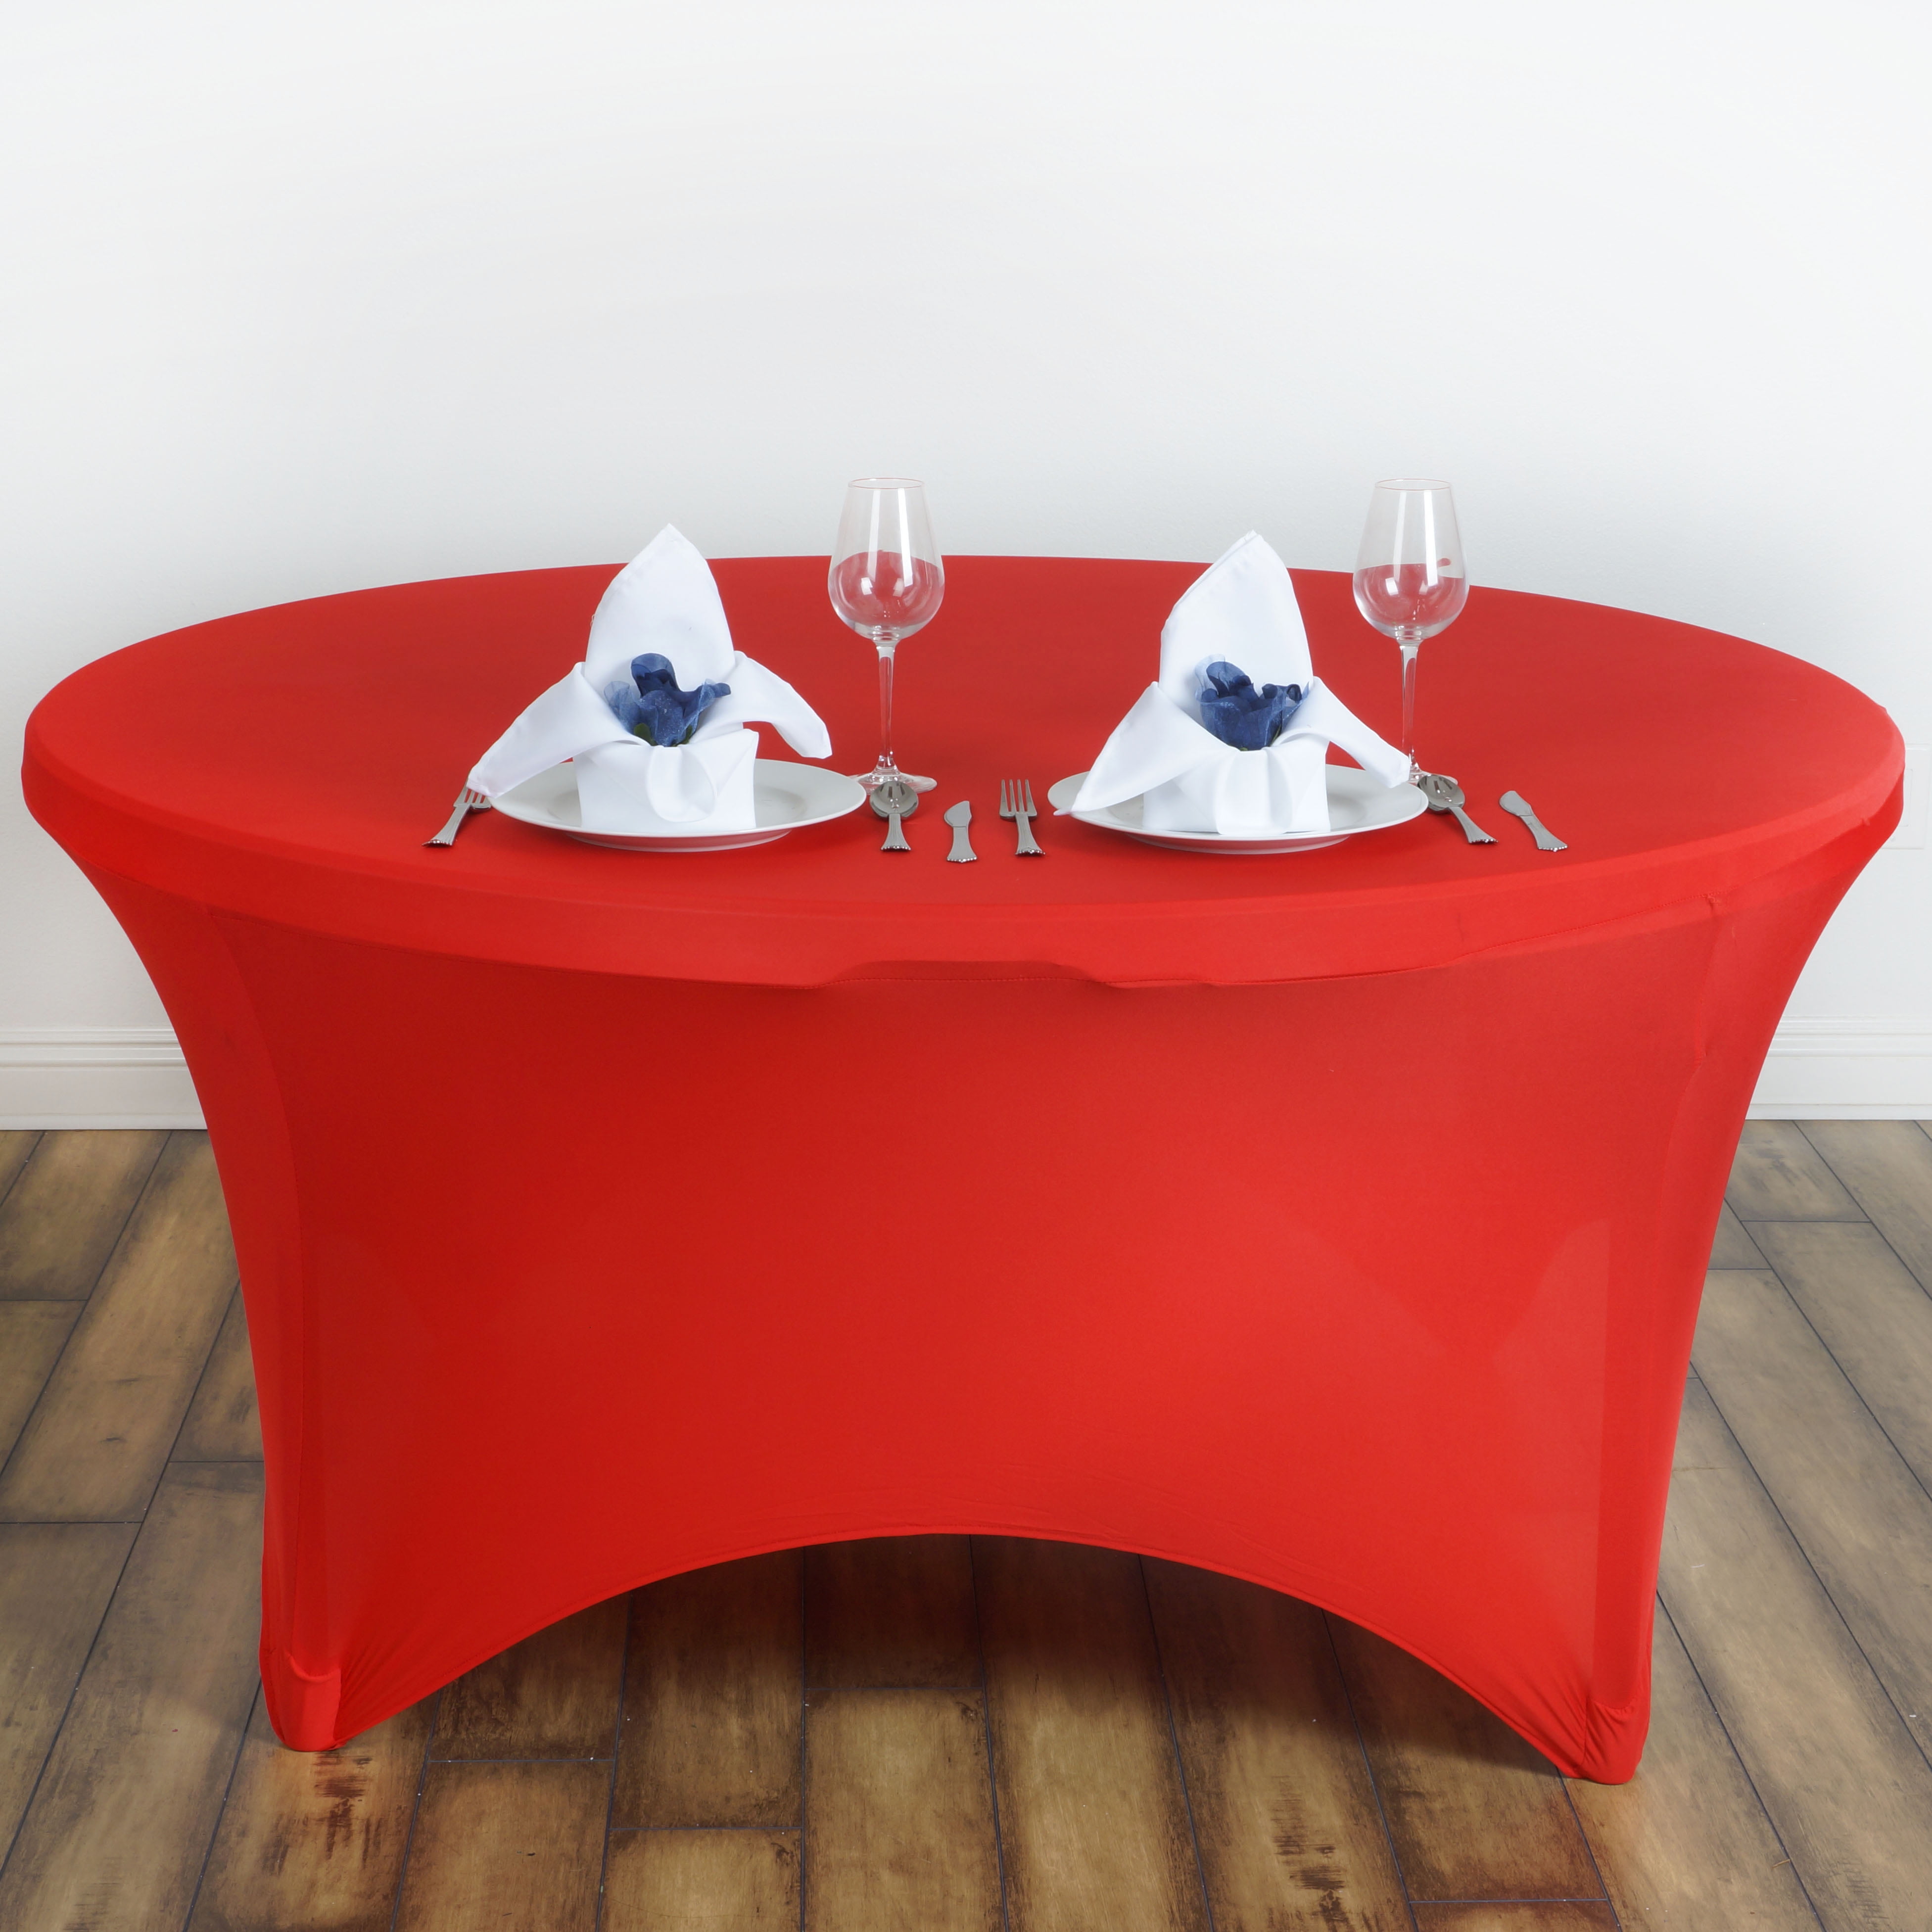 60" ROUND SPANDEX Tablecloth Wedding Banquet Party Stretch Table Cover RED 